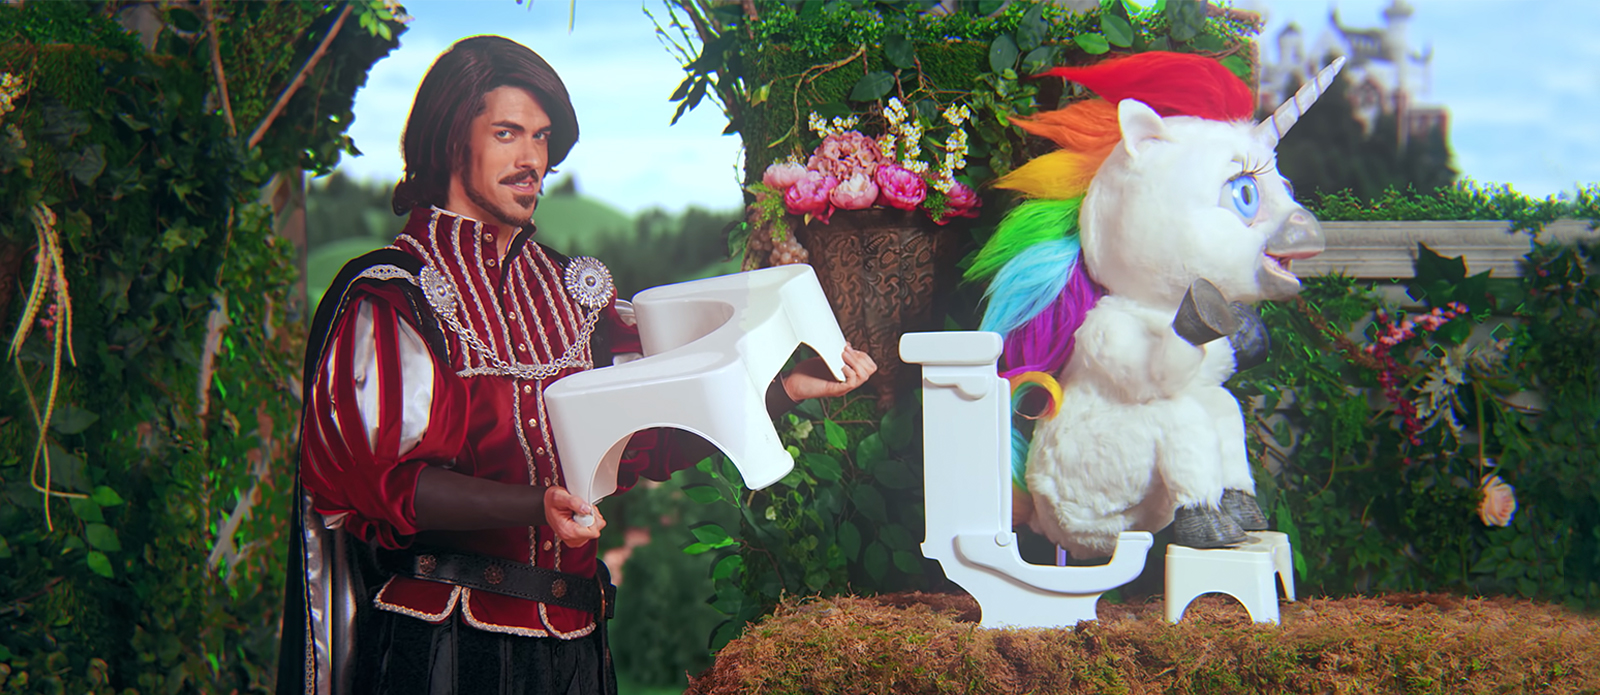 Notes on Campy Advertising - Squatty Potty Commercial Case Study